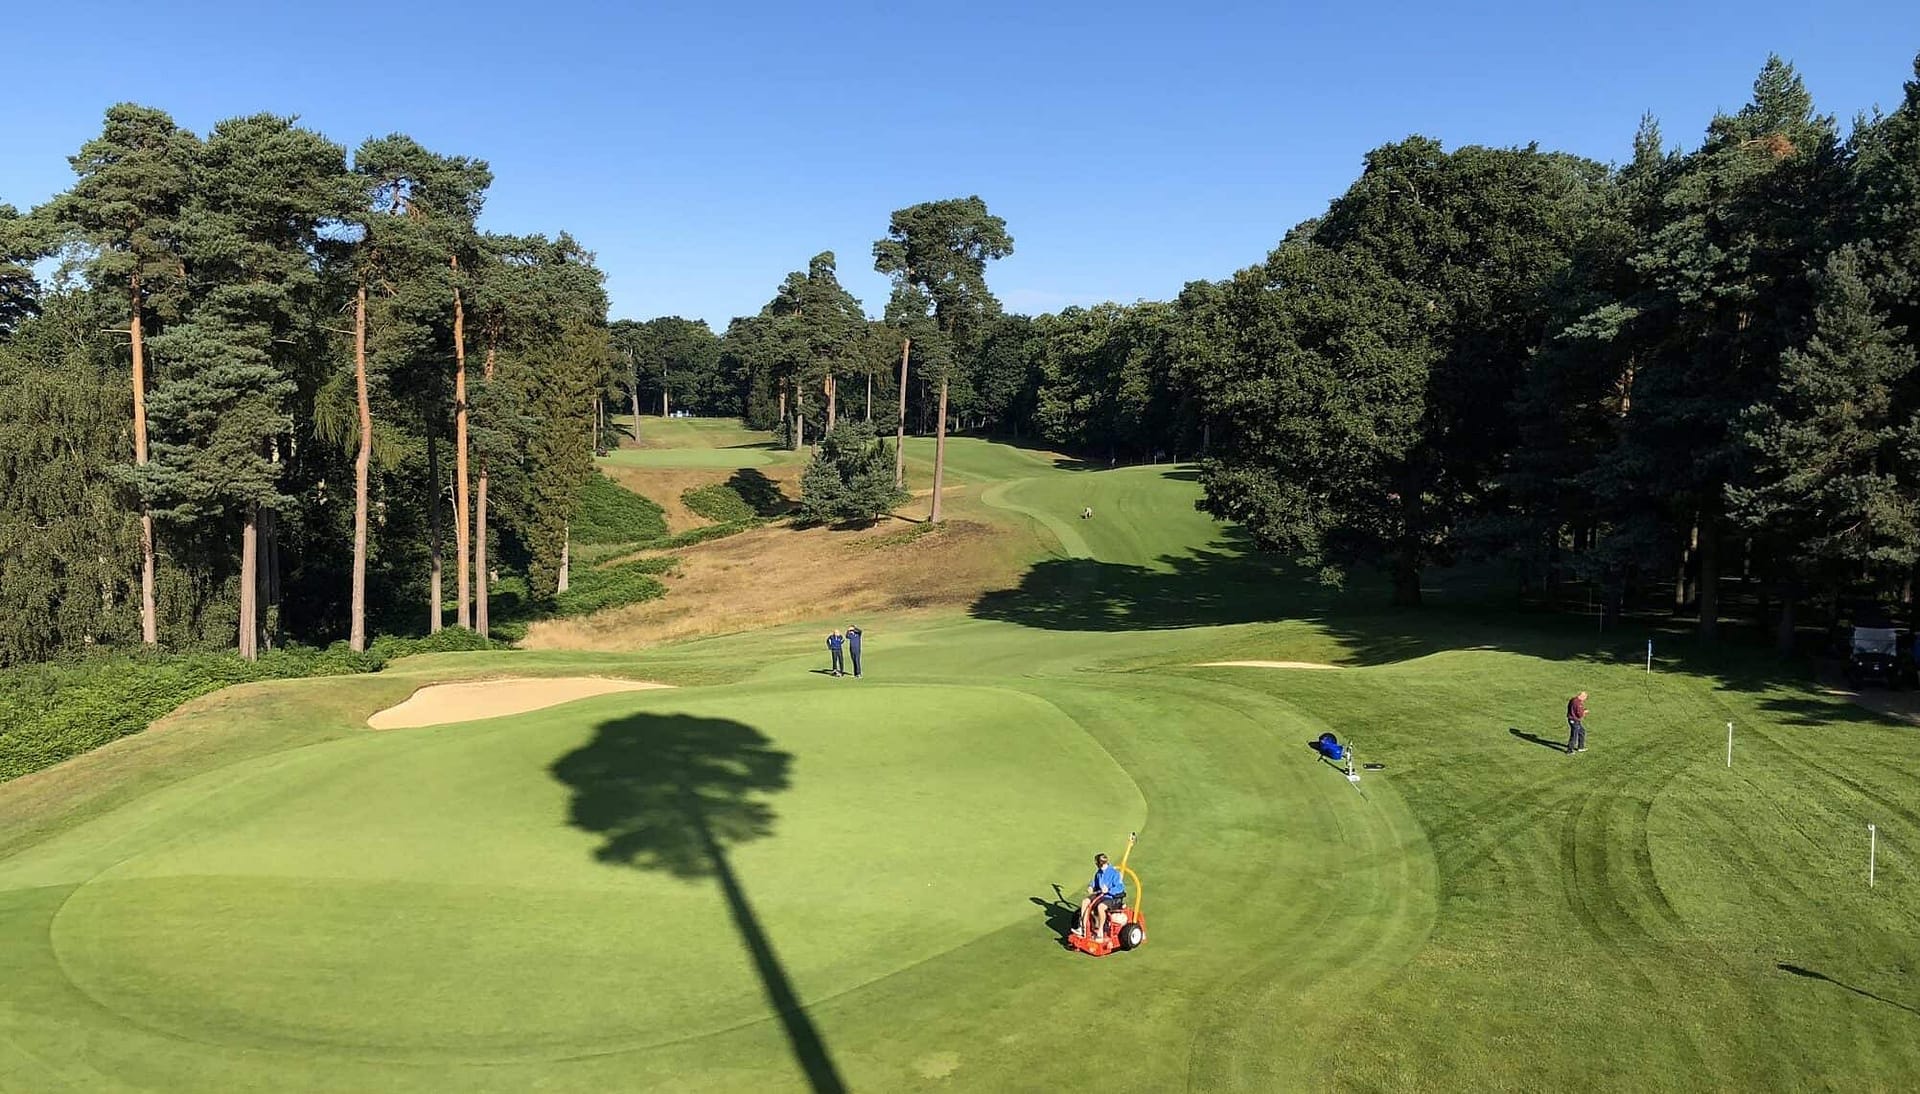 The 7th hole on Woburn's Marquess course